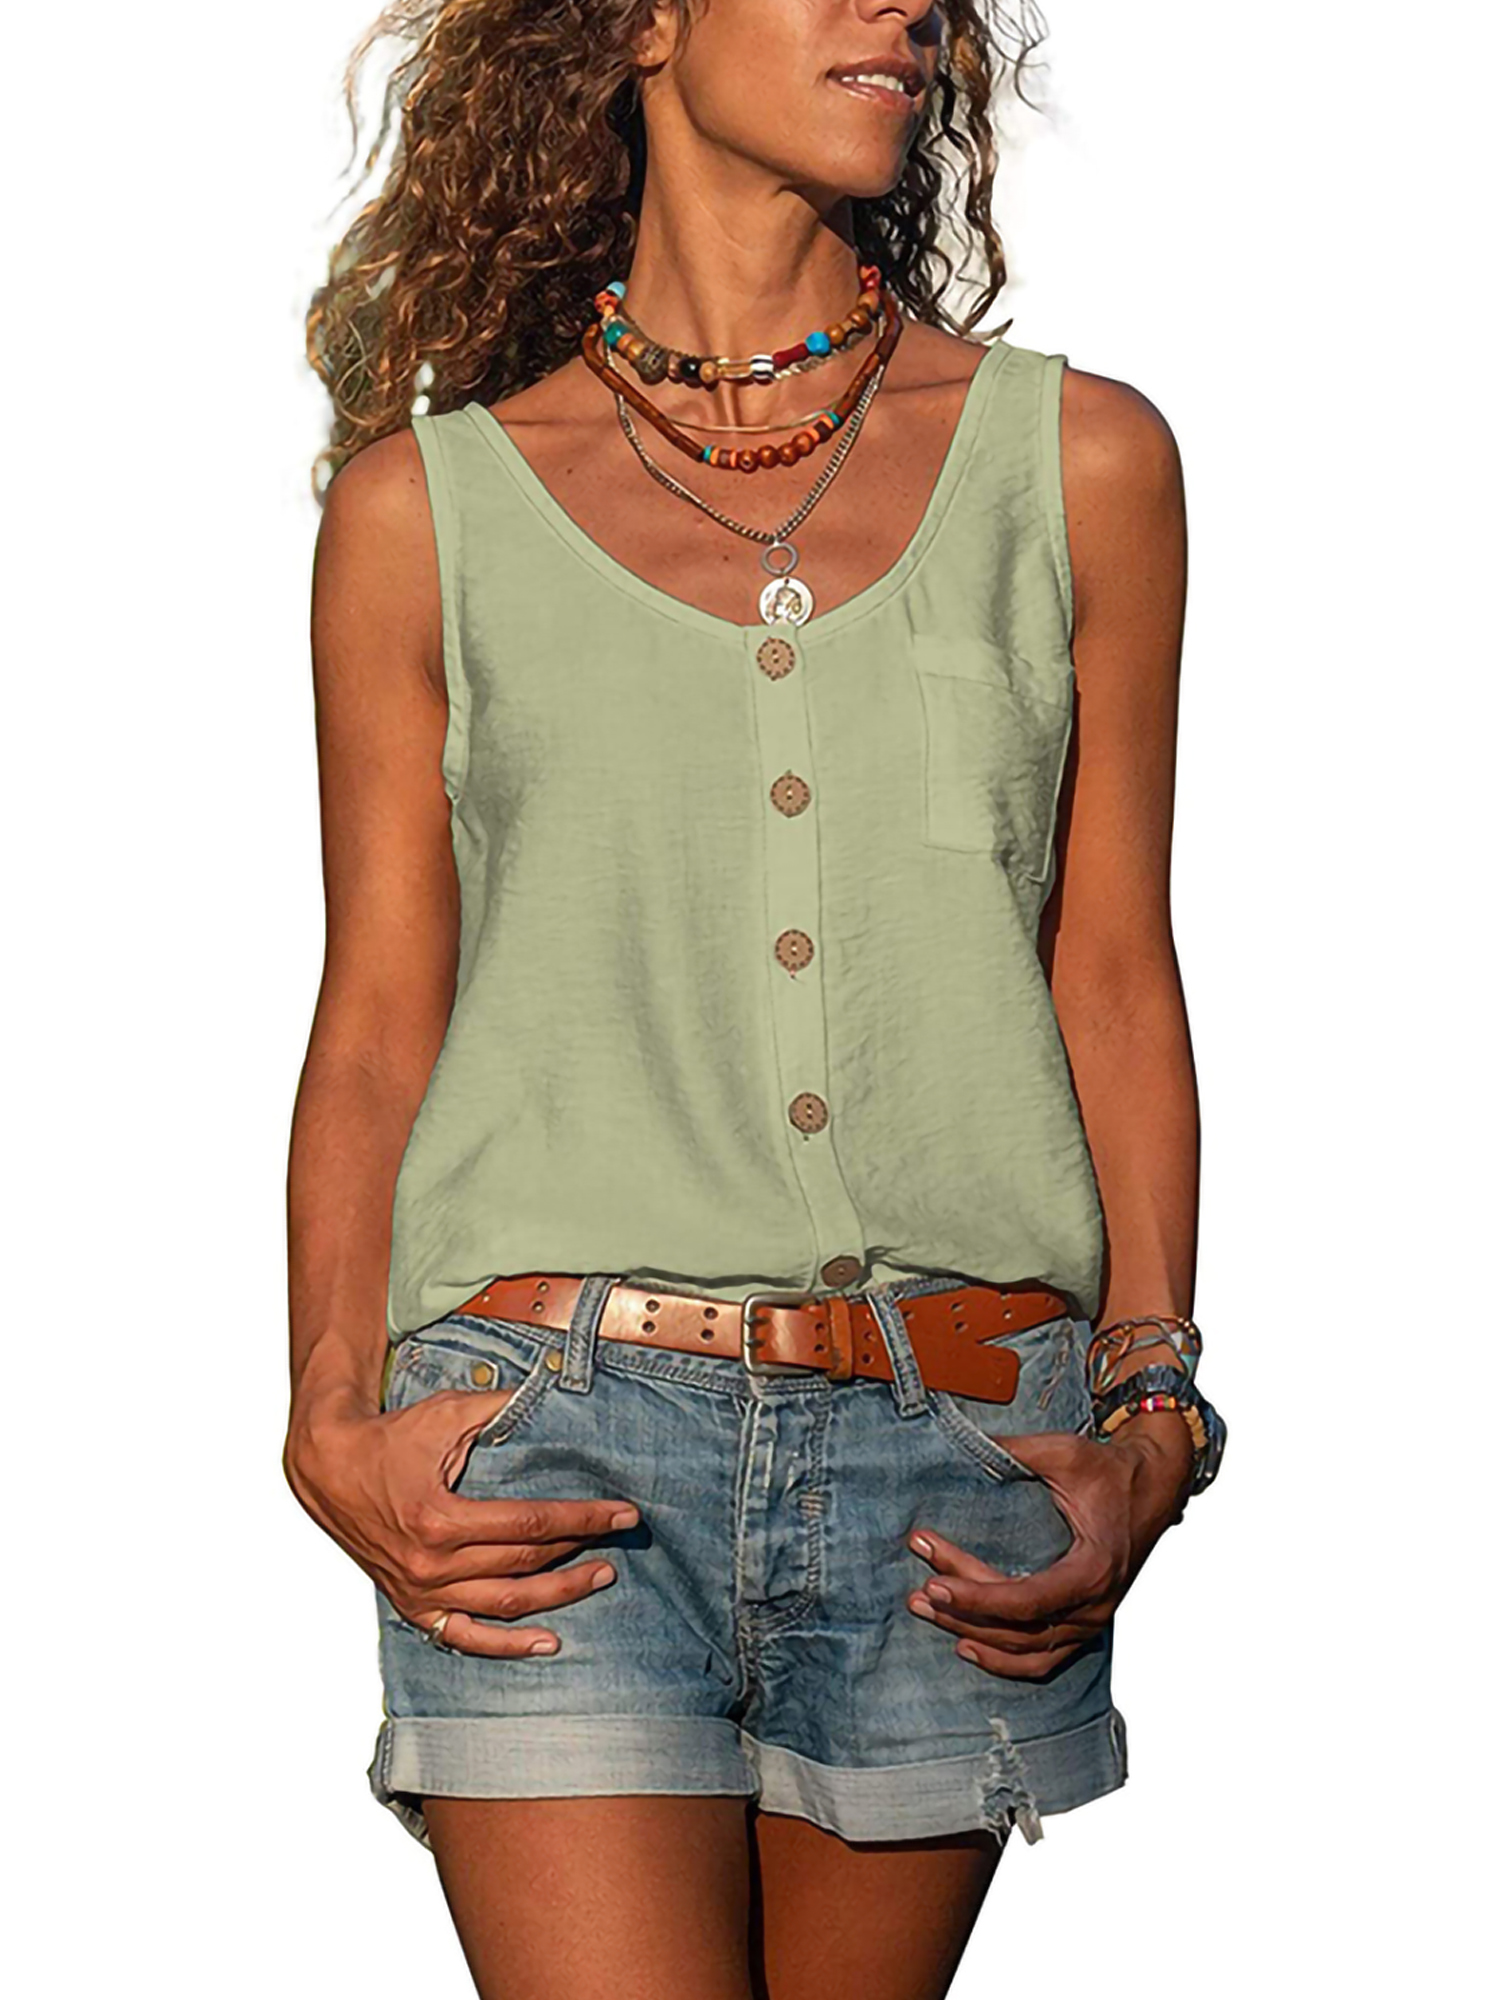 Women Summer Henley Cami Tank Tops Button Down Shirts Workout Casual Chiffon Sleeveless Cami Camisole Tunics Loose Fit Tees Blouse - image 1 of 3